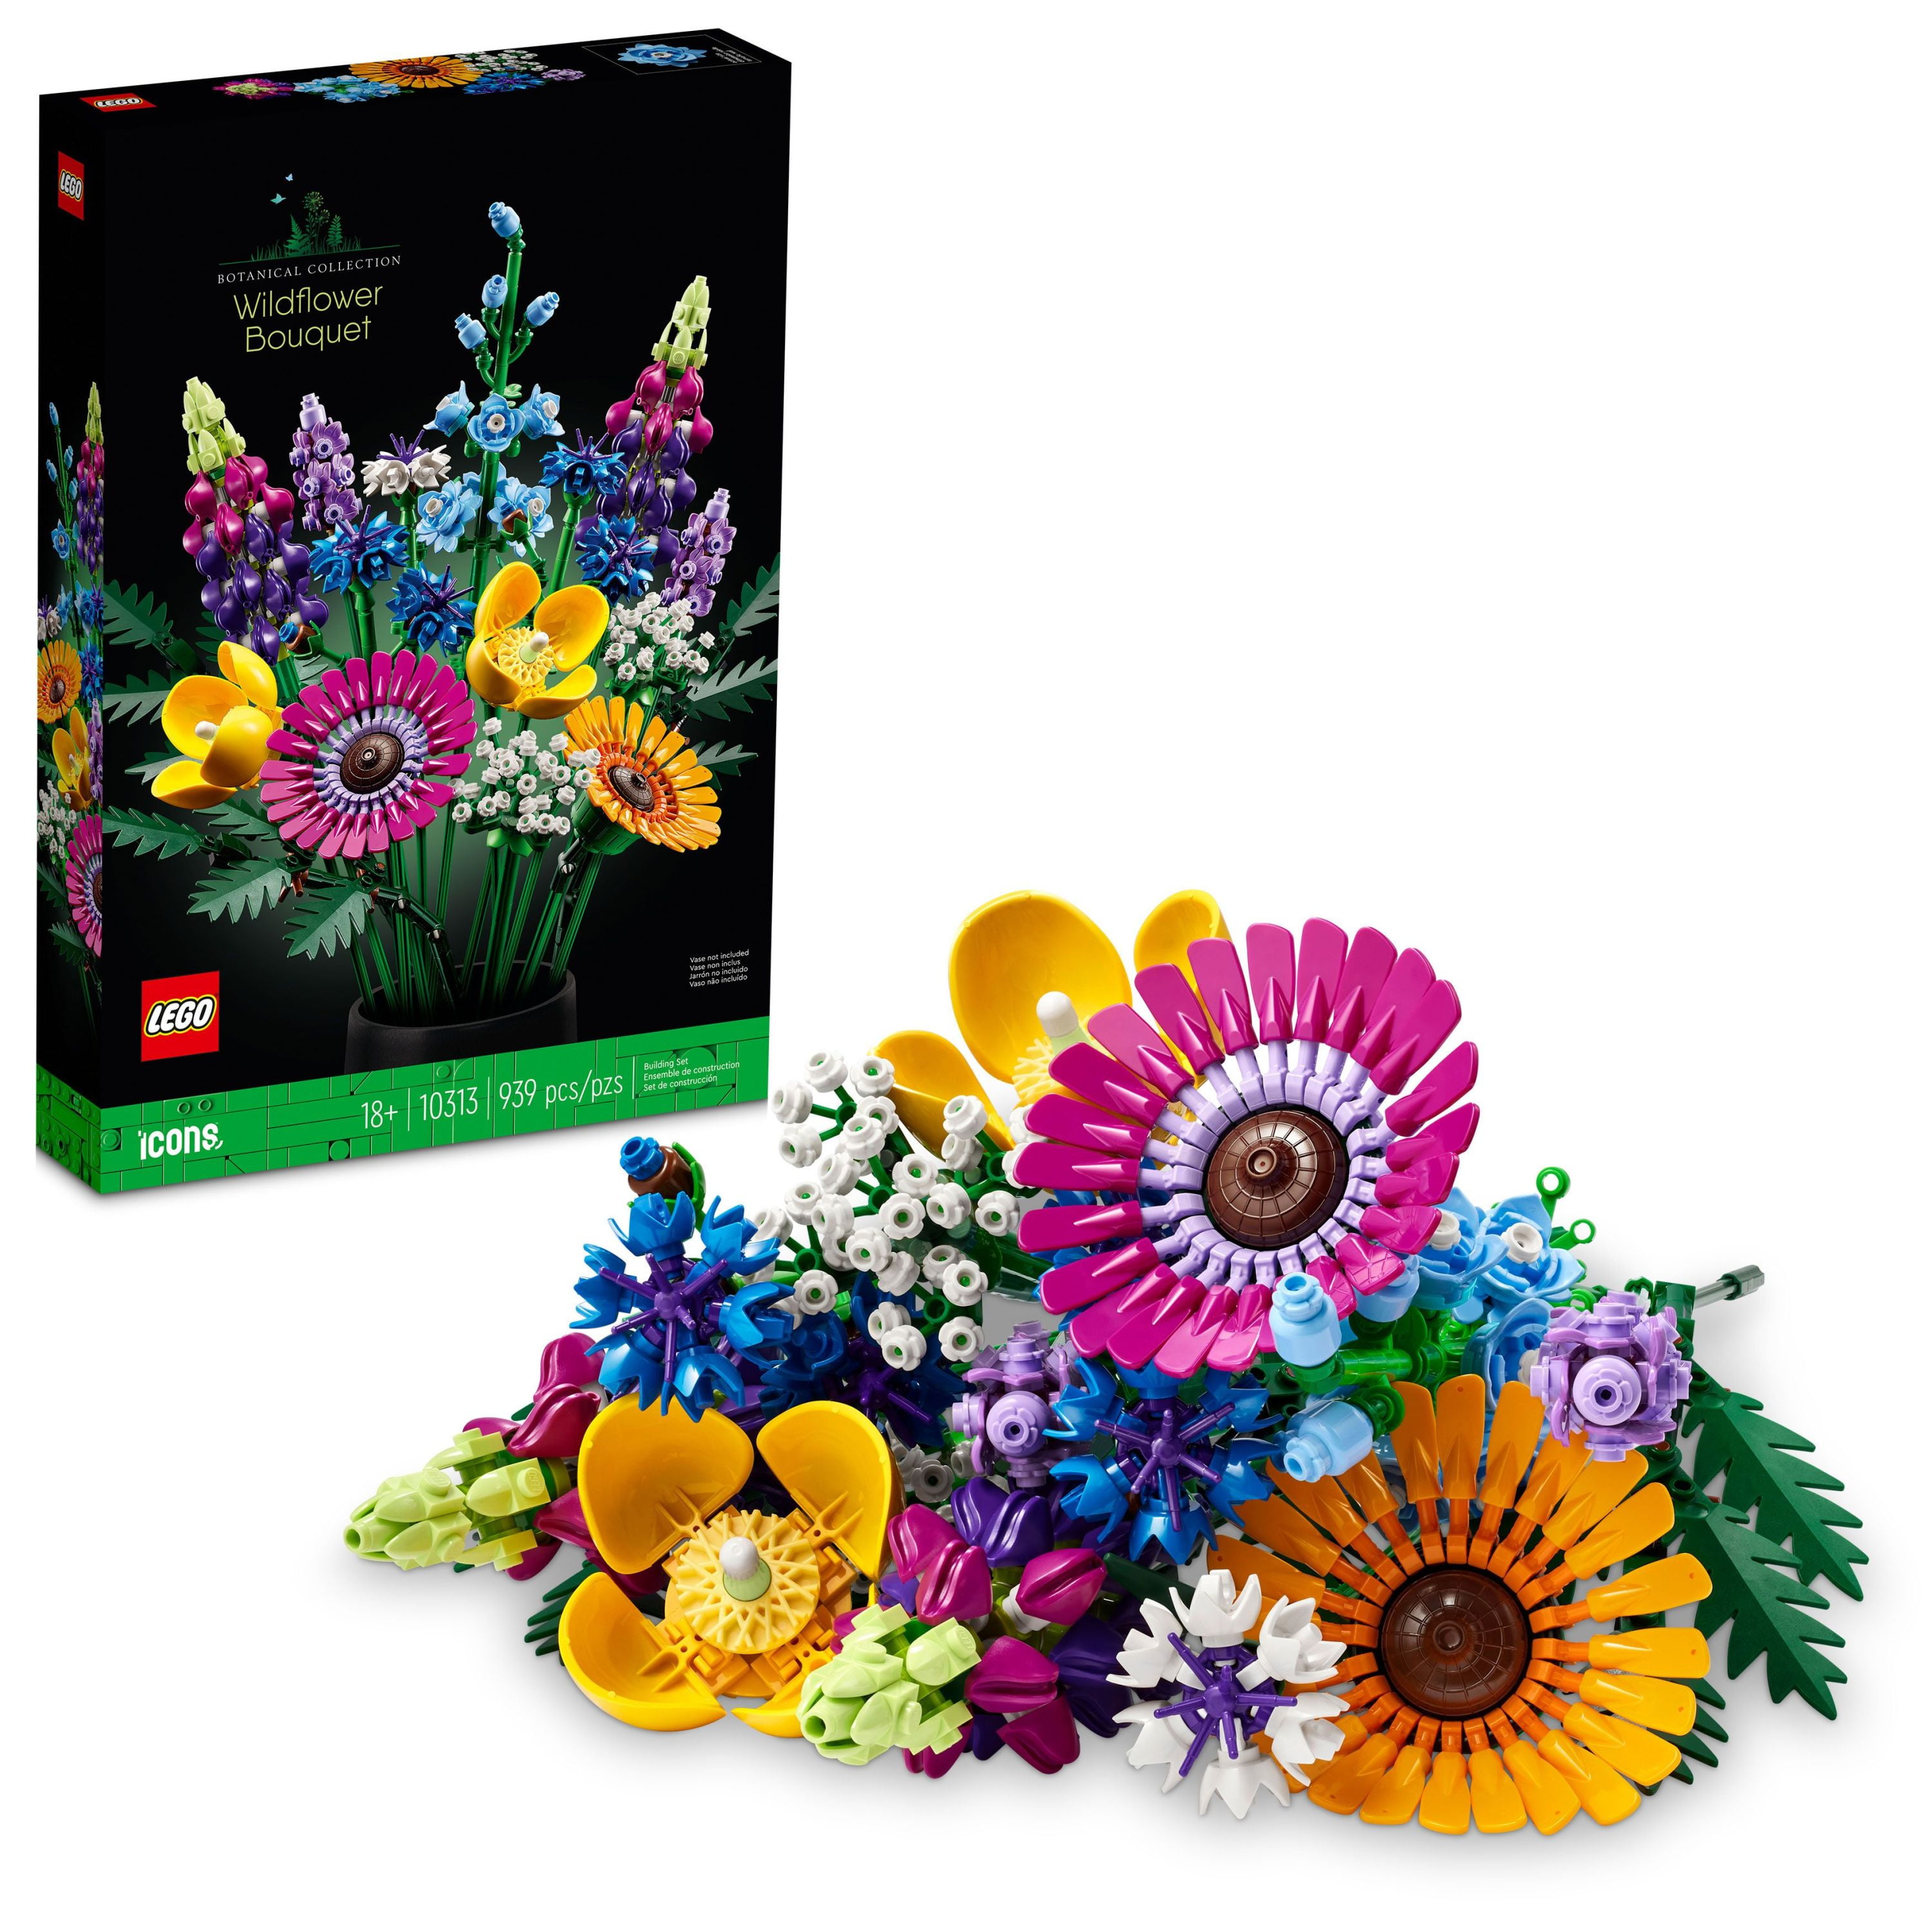 LEGO Icons Wildflower Bouquet 10313 Artificial Flowers with Poppies and Lavender, Anniversary and Mother's Day Gift for Wife, Unique Home Dcor, Botanical Collection with Spring Flowers